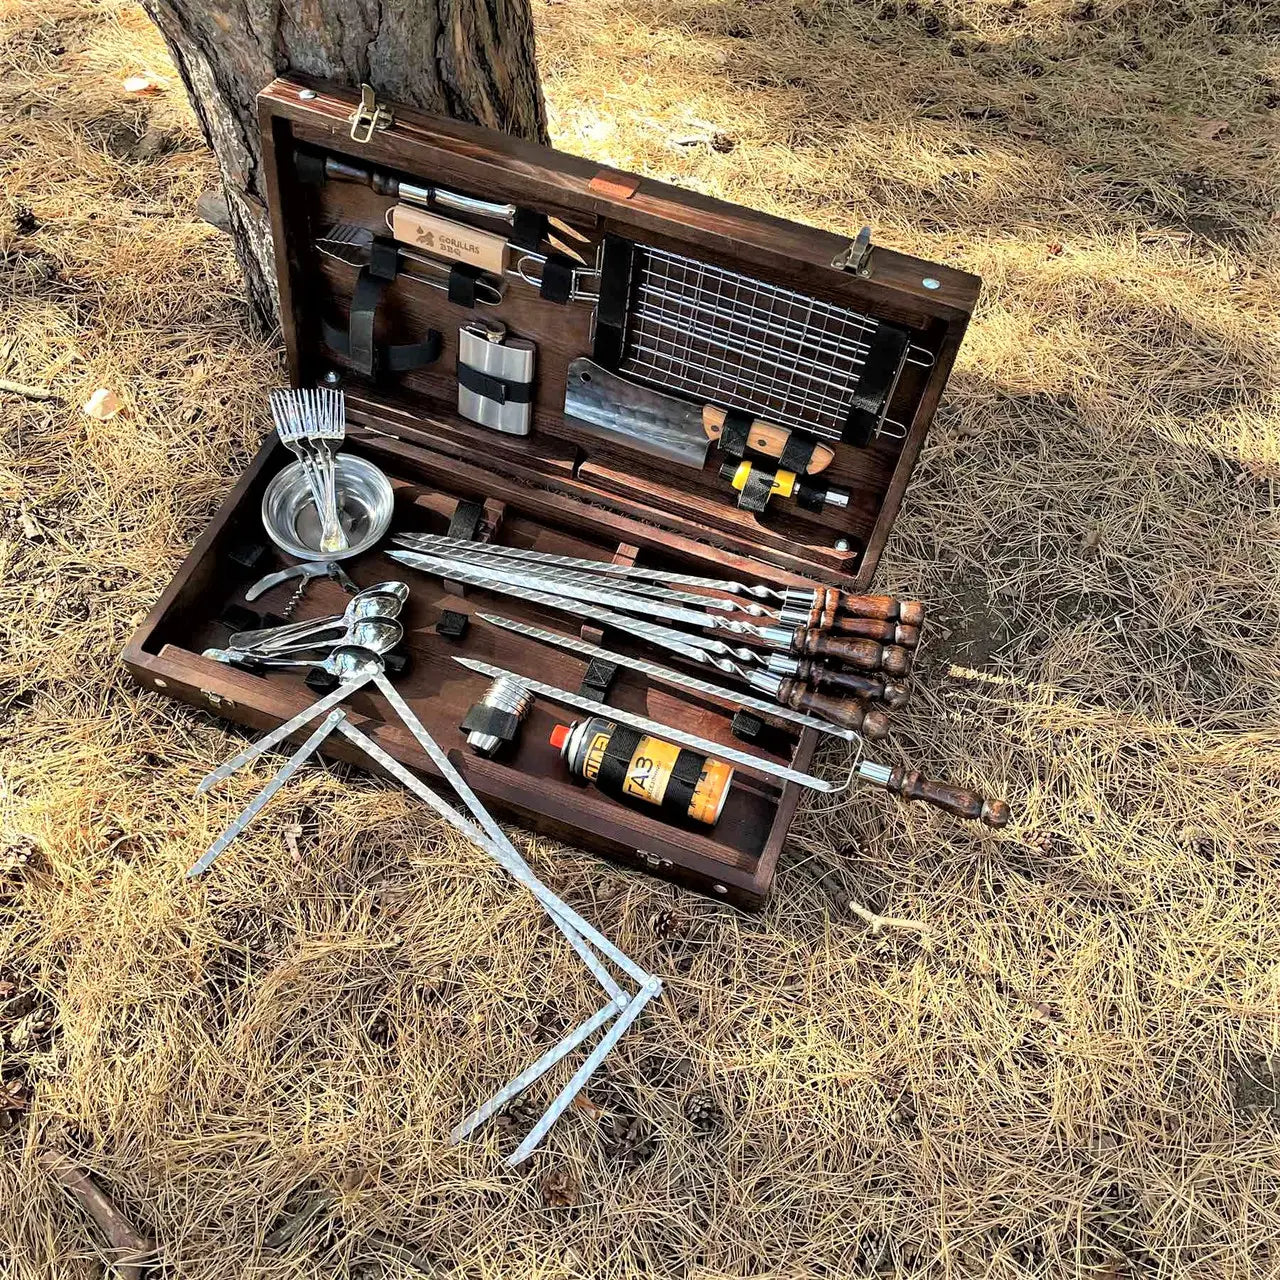 BBQ Tools Set - Grilling Accessories – Skewers Set "Chameleon"- BBQ Grills and Accessories in a Wooden Case Table, 34 items